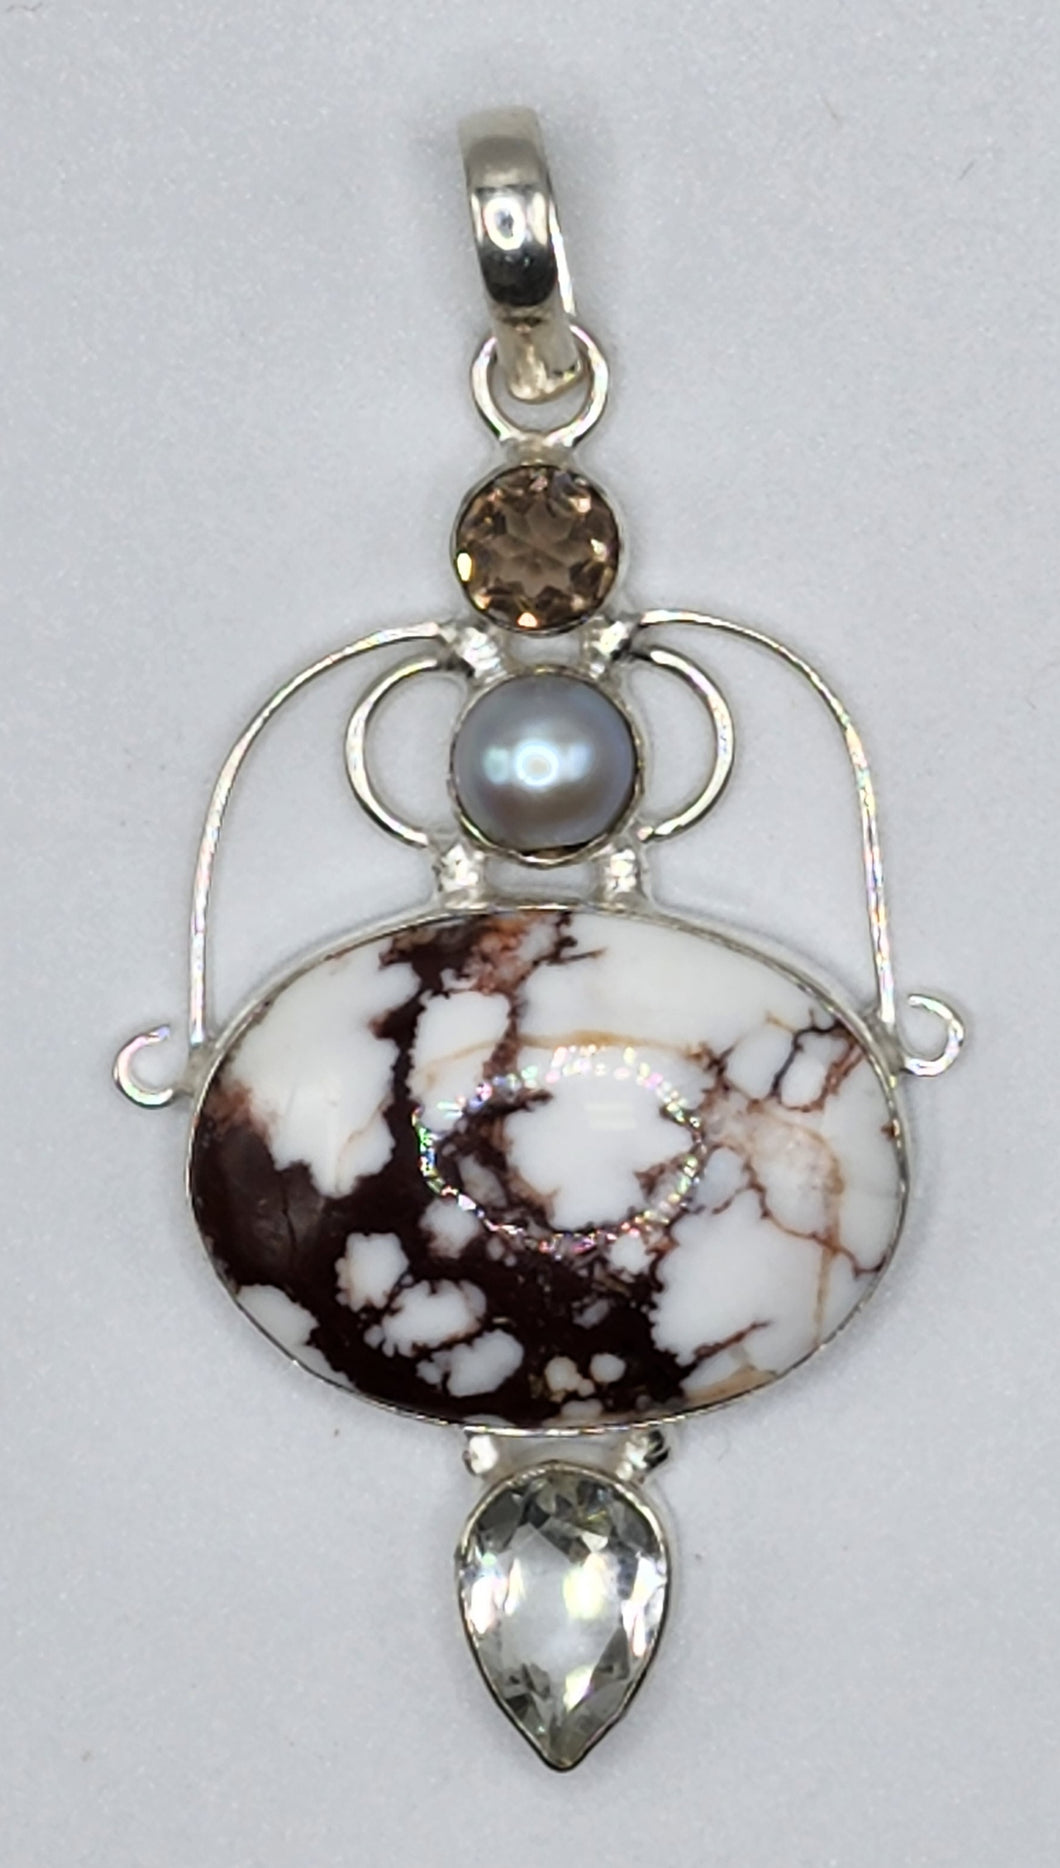 Wild Horse Magnesite Gemstone With Smokey Quartz Gemstone and Freshwater Pearl Pendant Set in 925 Sterling Silver